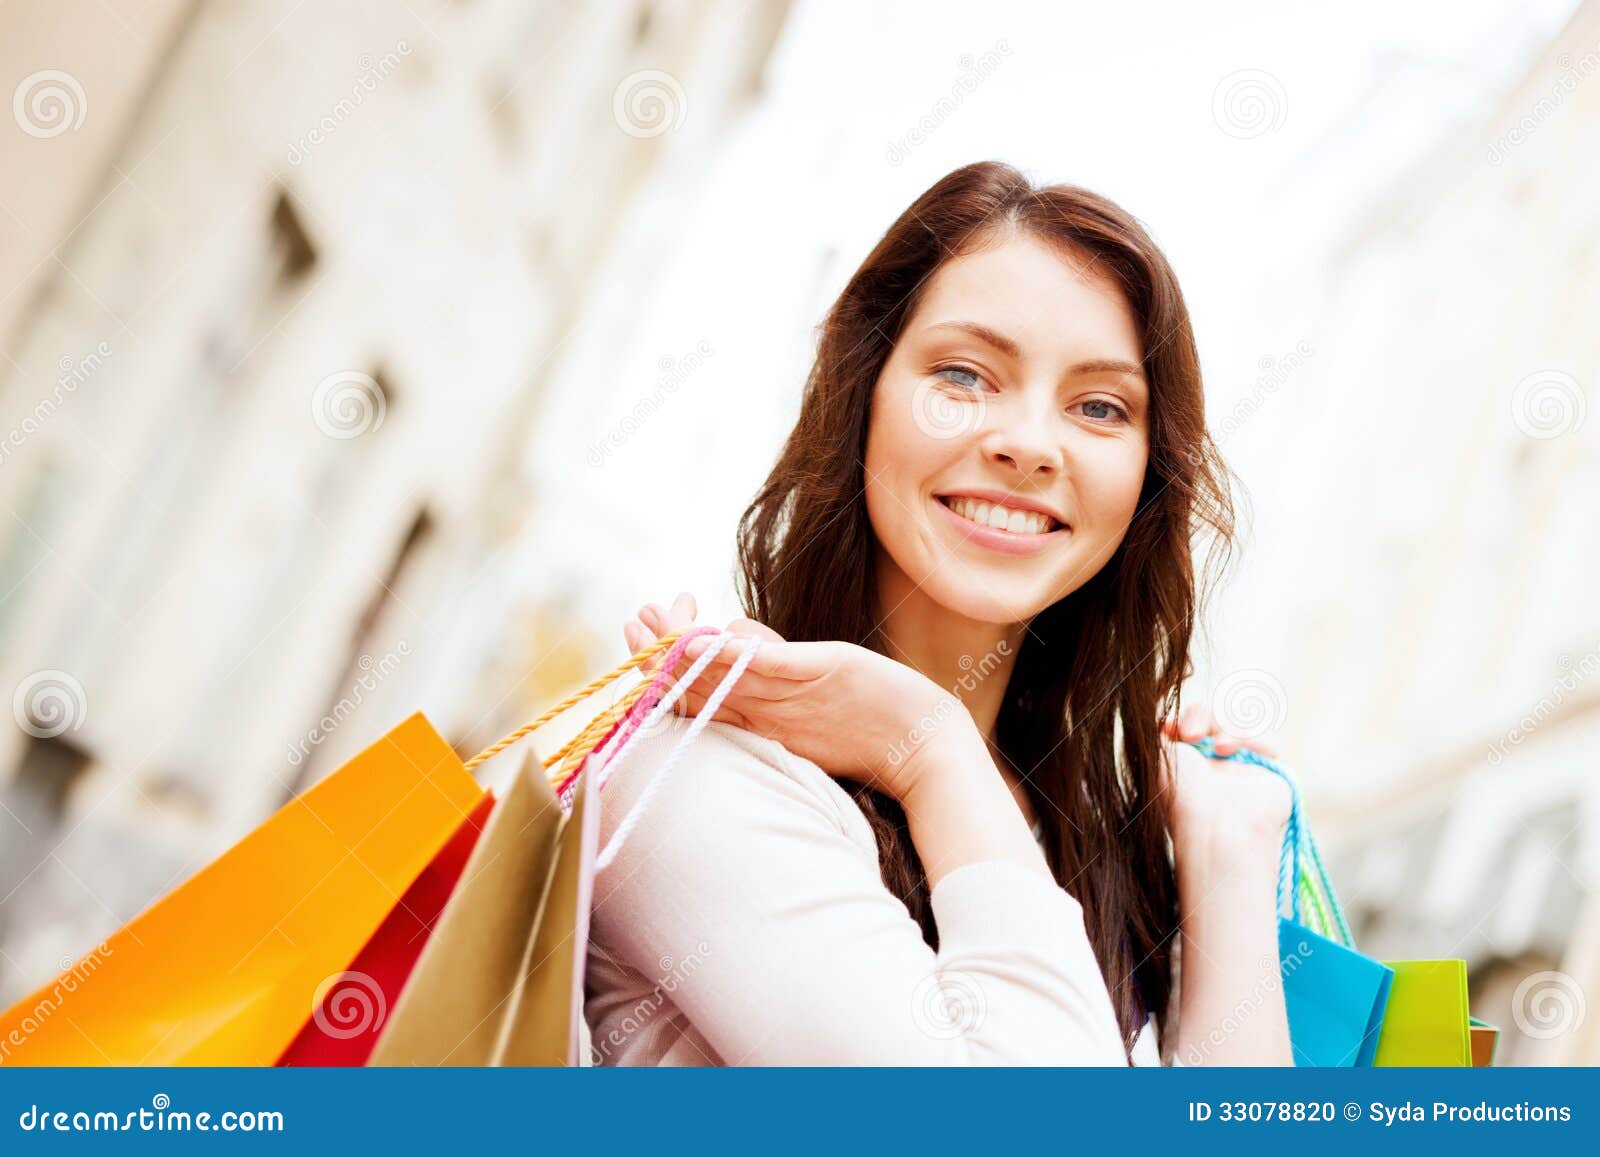 Woman with Shopping Bags in Ctiy Stock Photo - Image of purchase, hands ...